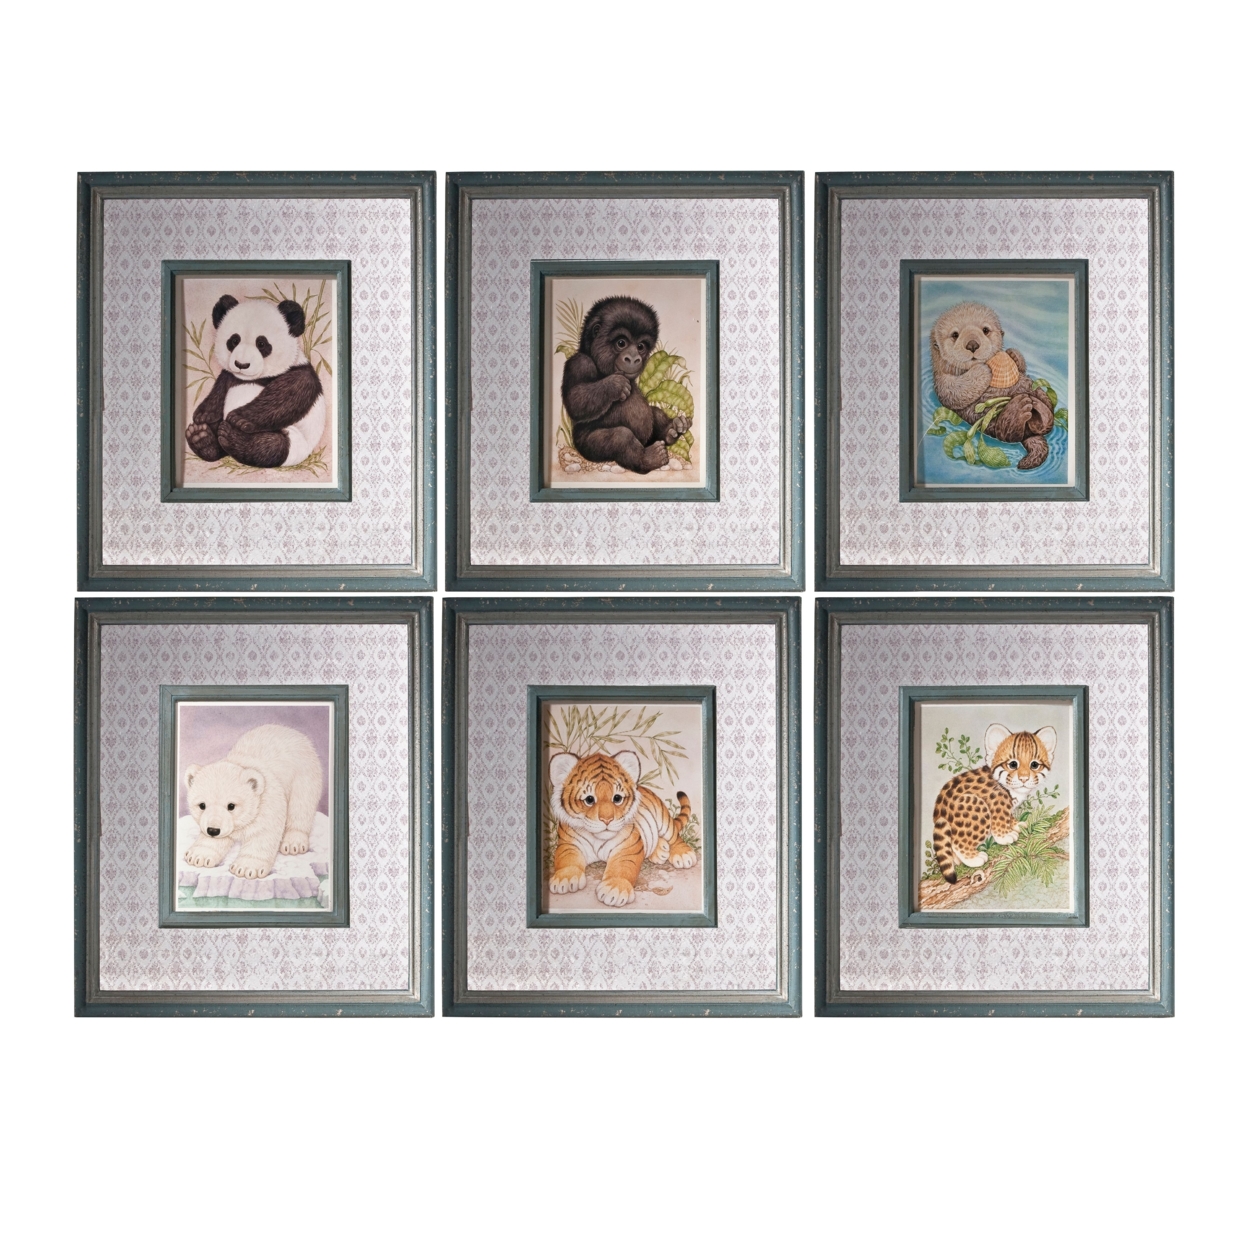 Wooden Framed Wall Art With Winsome Animals, Multicolor, Set Of 6- Saltoro Sherpi